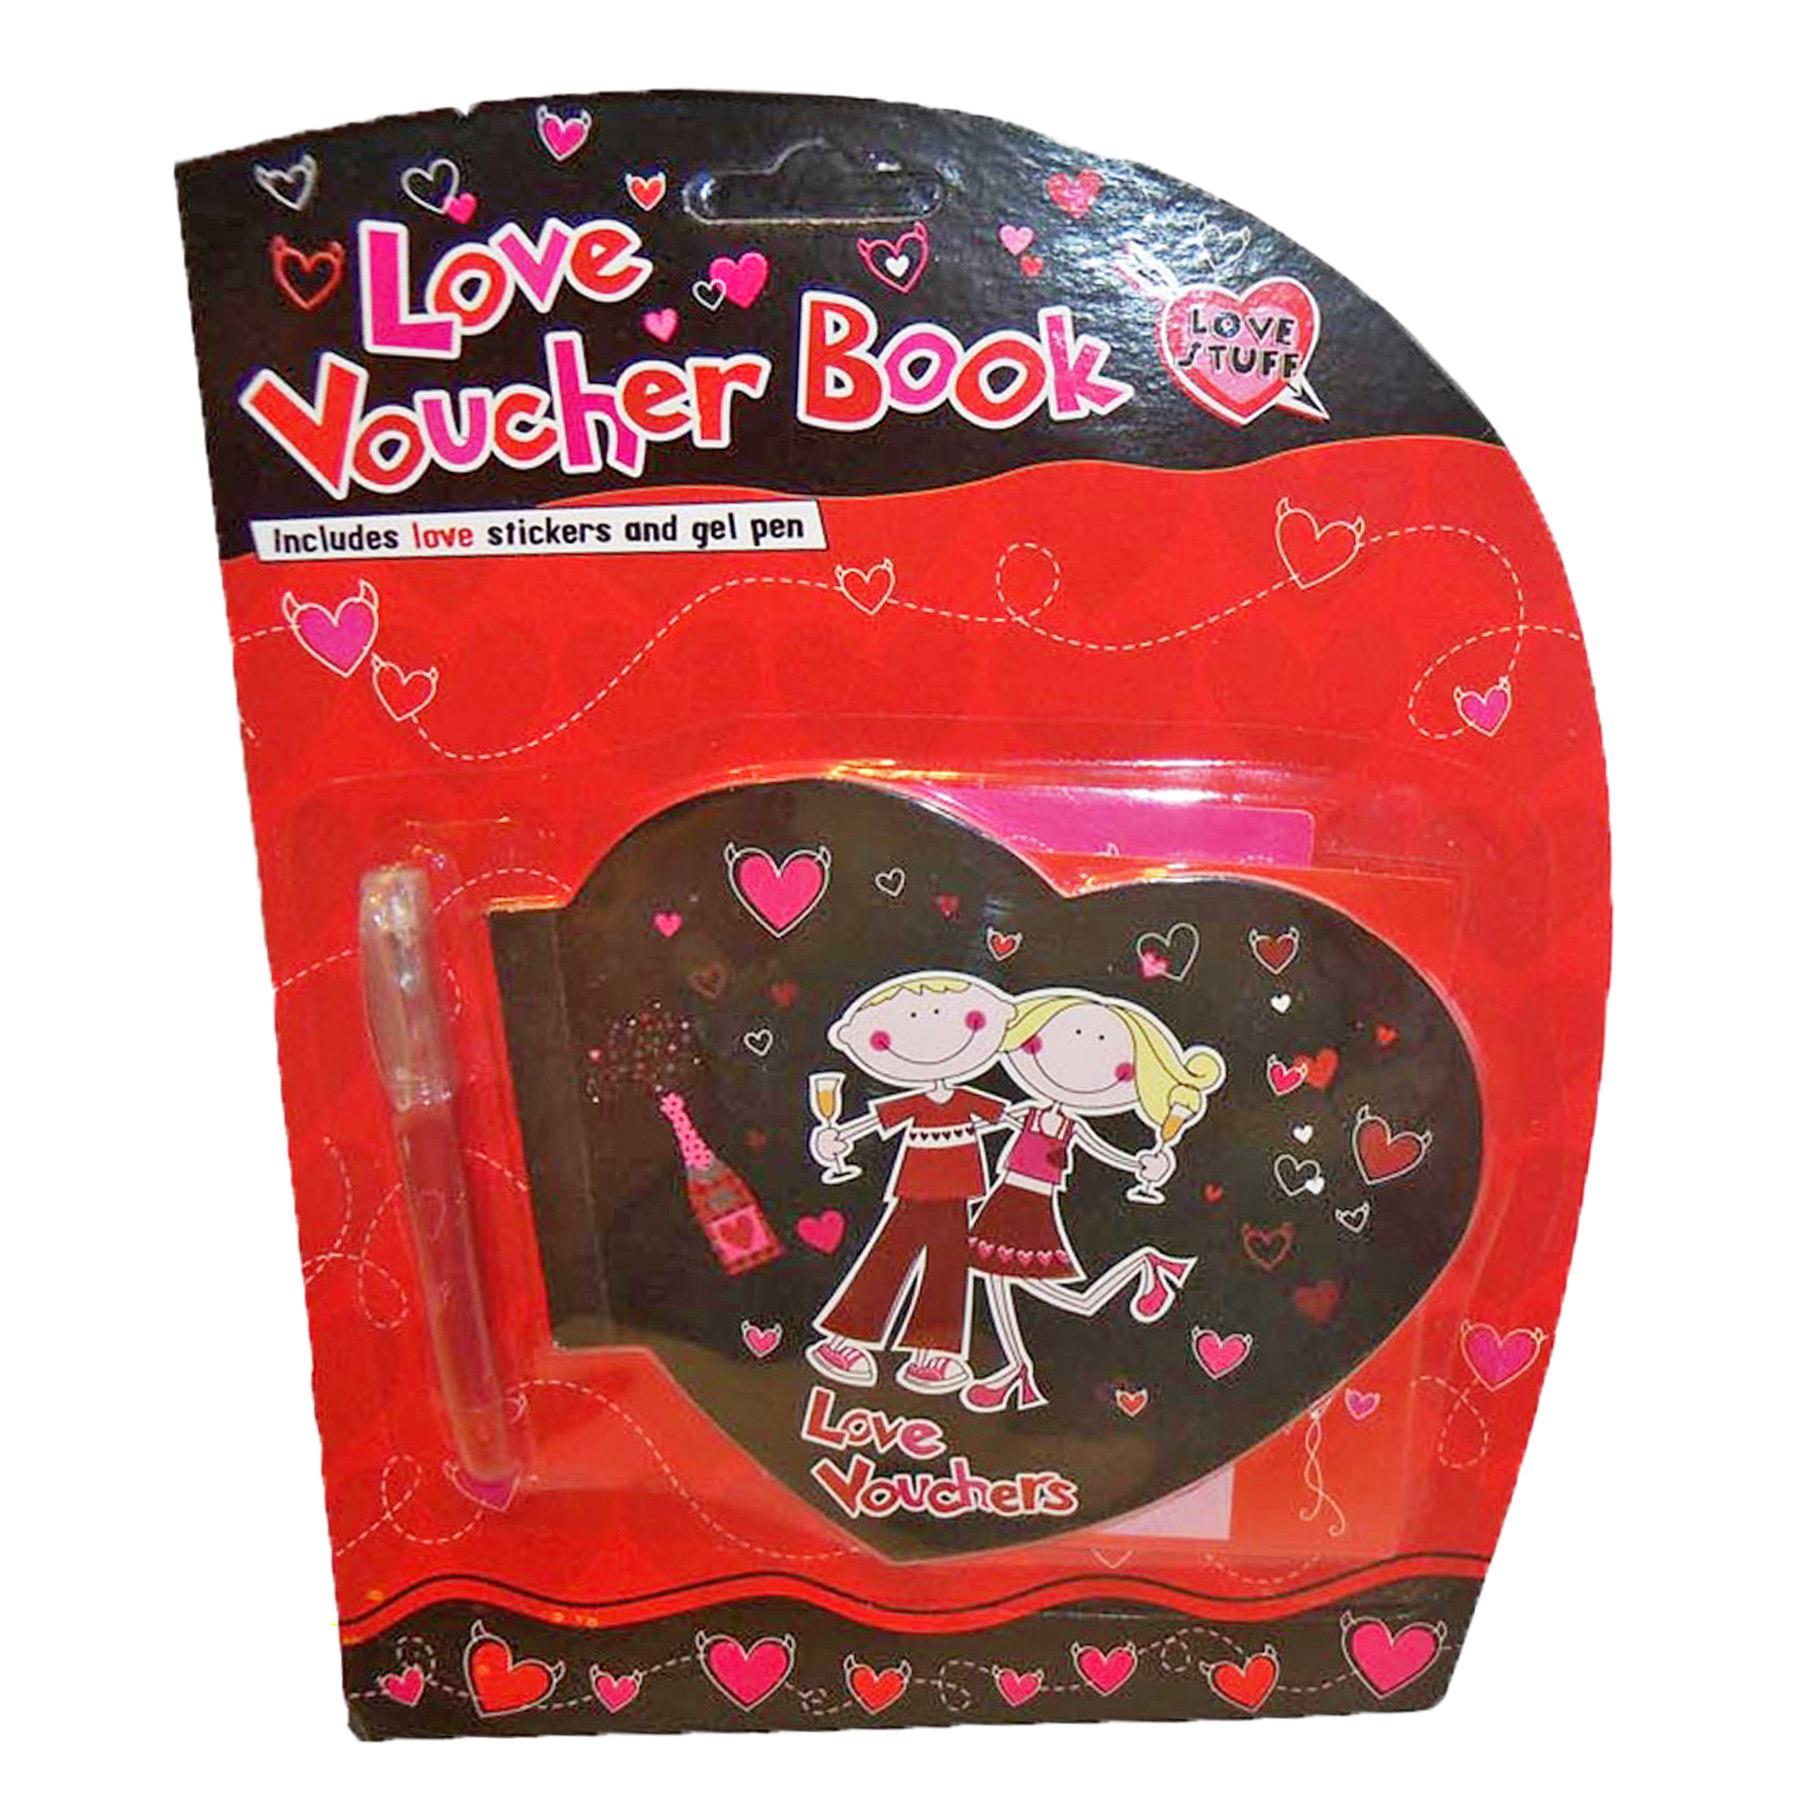 Valentines Love Voucher Book with Stickers and Pen Novelty